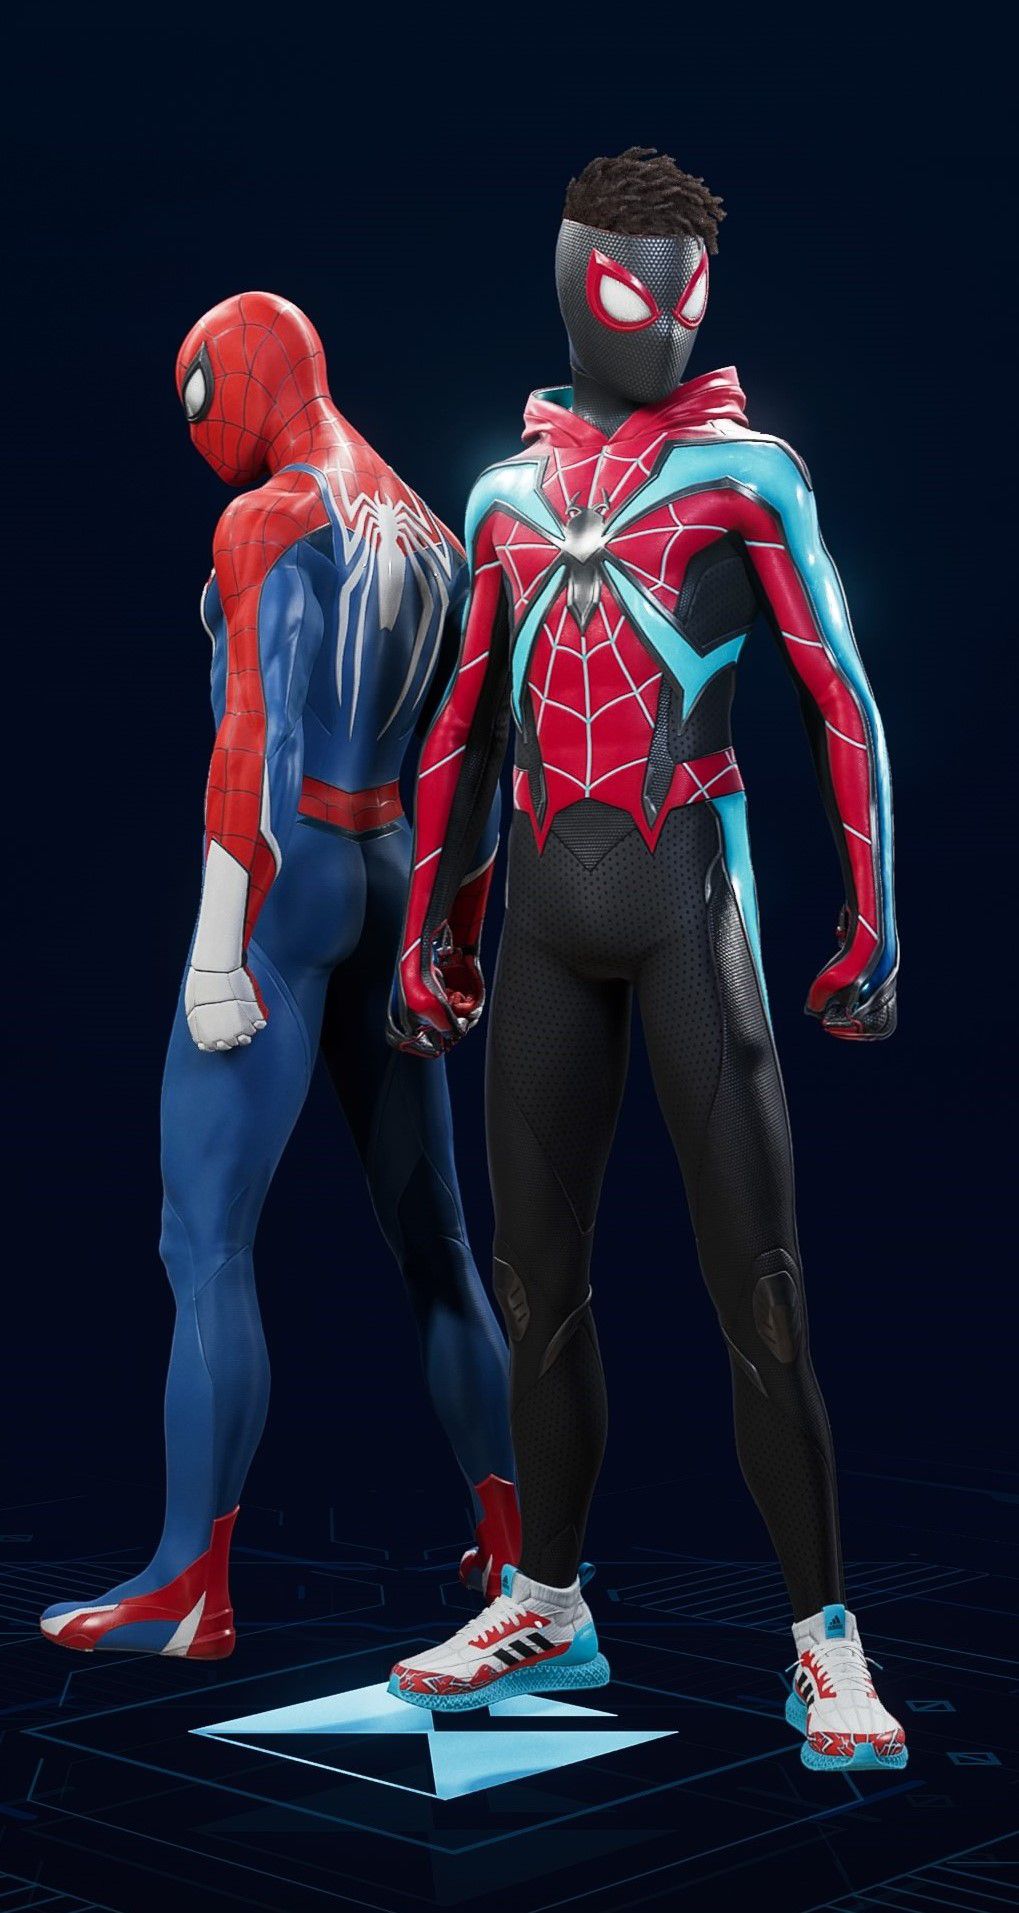 Miles Morales stands in his Evolved Suit in the suit selection screen of Spider-Man 2.